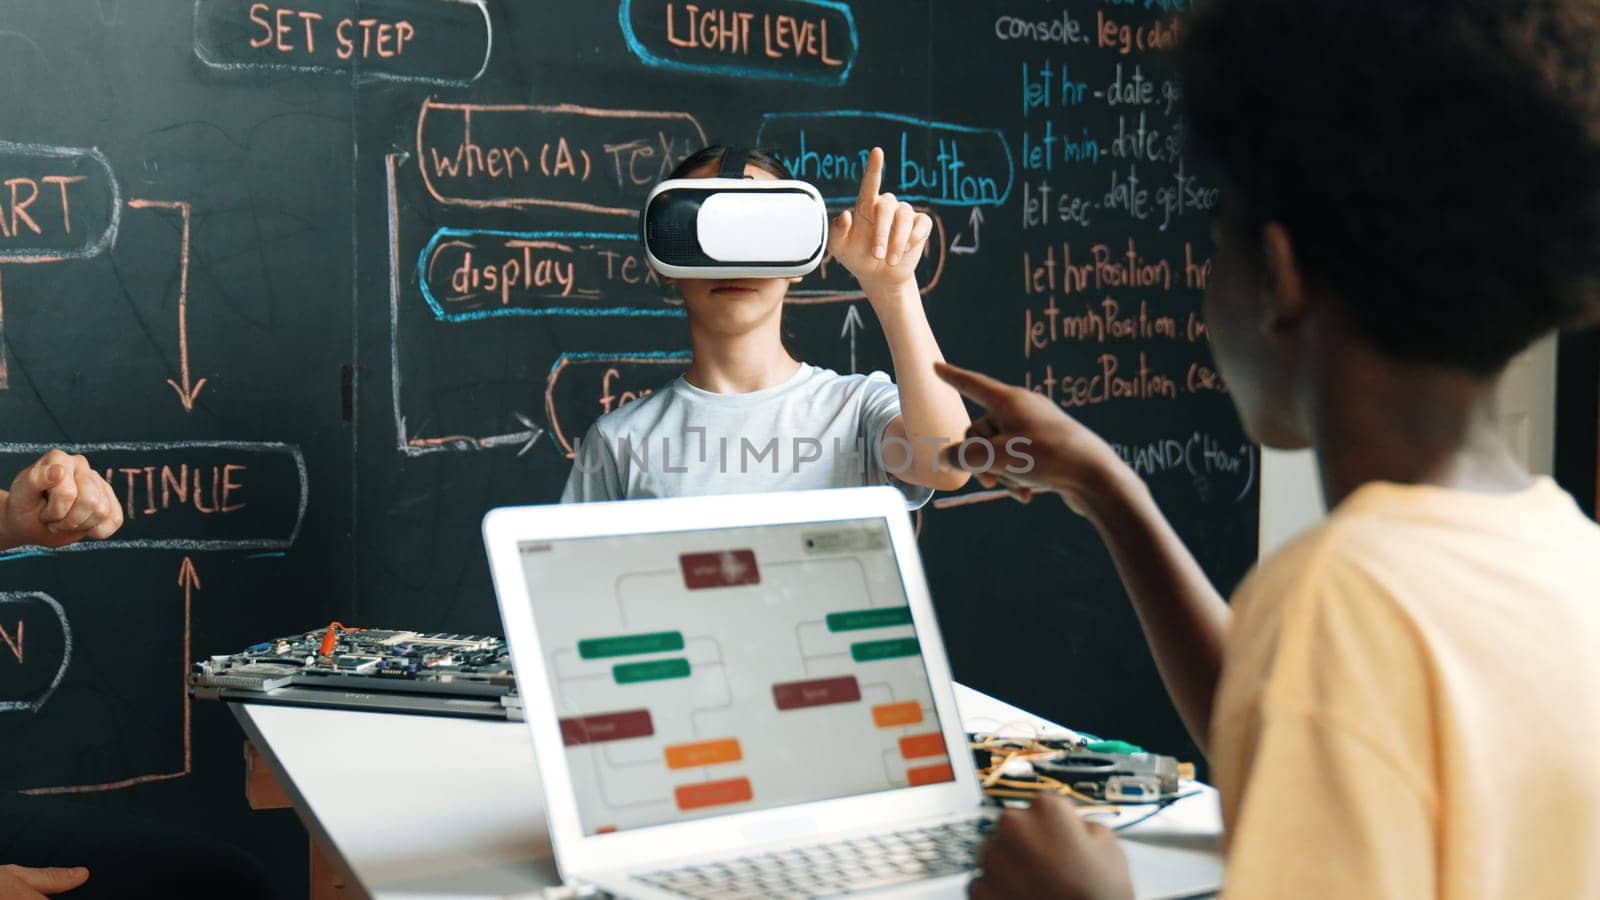 African boy programing system while caucasian girl enter metaverse while sitting at blackboard with engineering code written.Highschool girl wearing VR or headset in STEM technology. Edification.